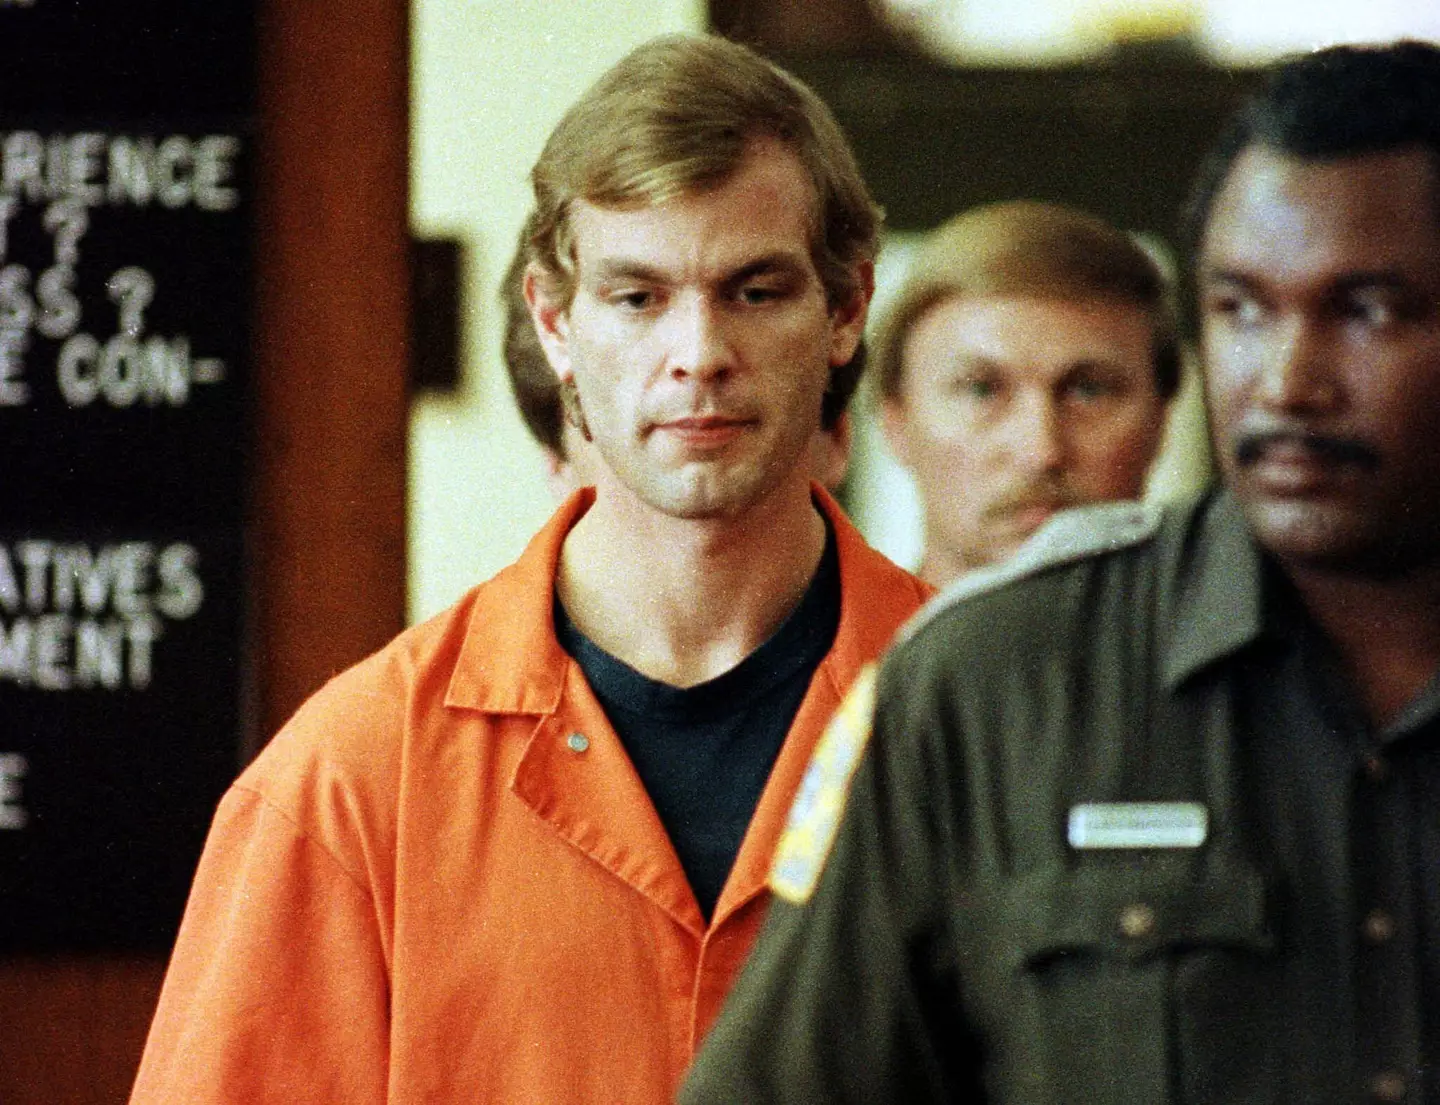 Dahmer was convicted of murdering 17 people.